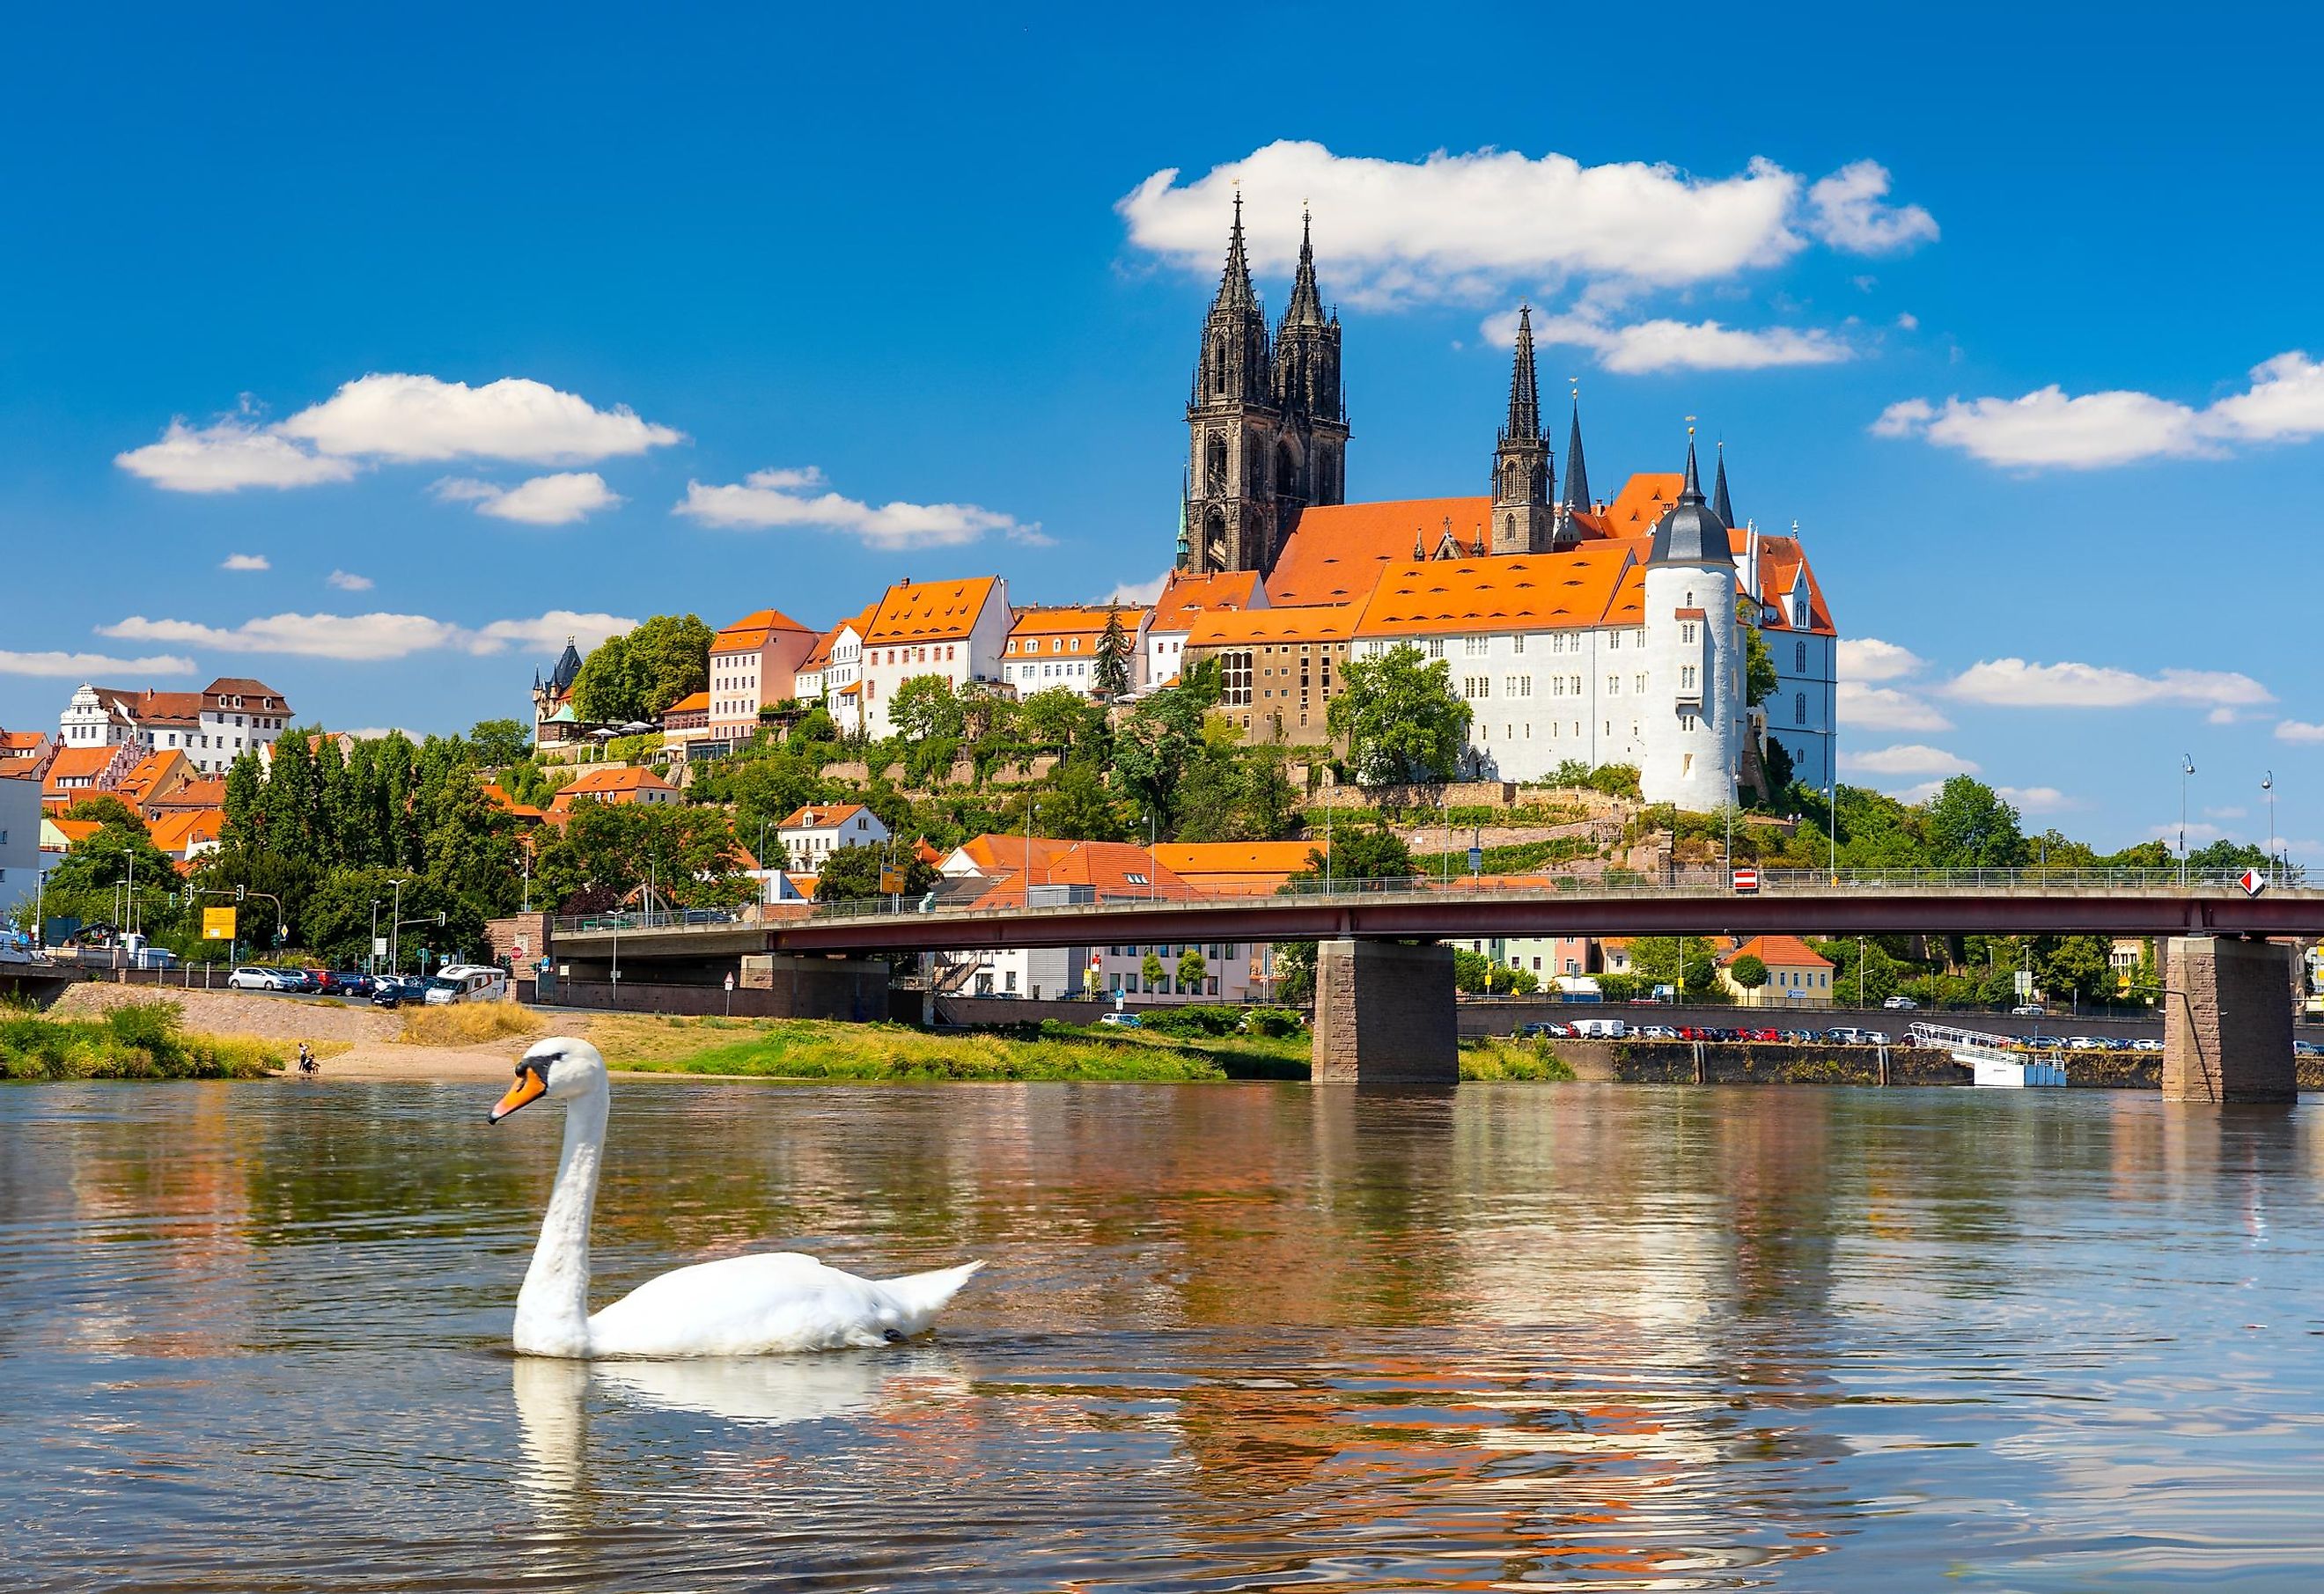 Albrechtsburg Castle and cathedral overlooking the River Elbe in Meissen, Saxony, Germany.